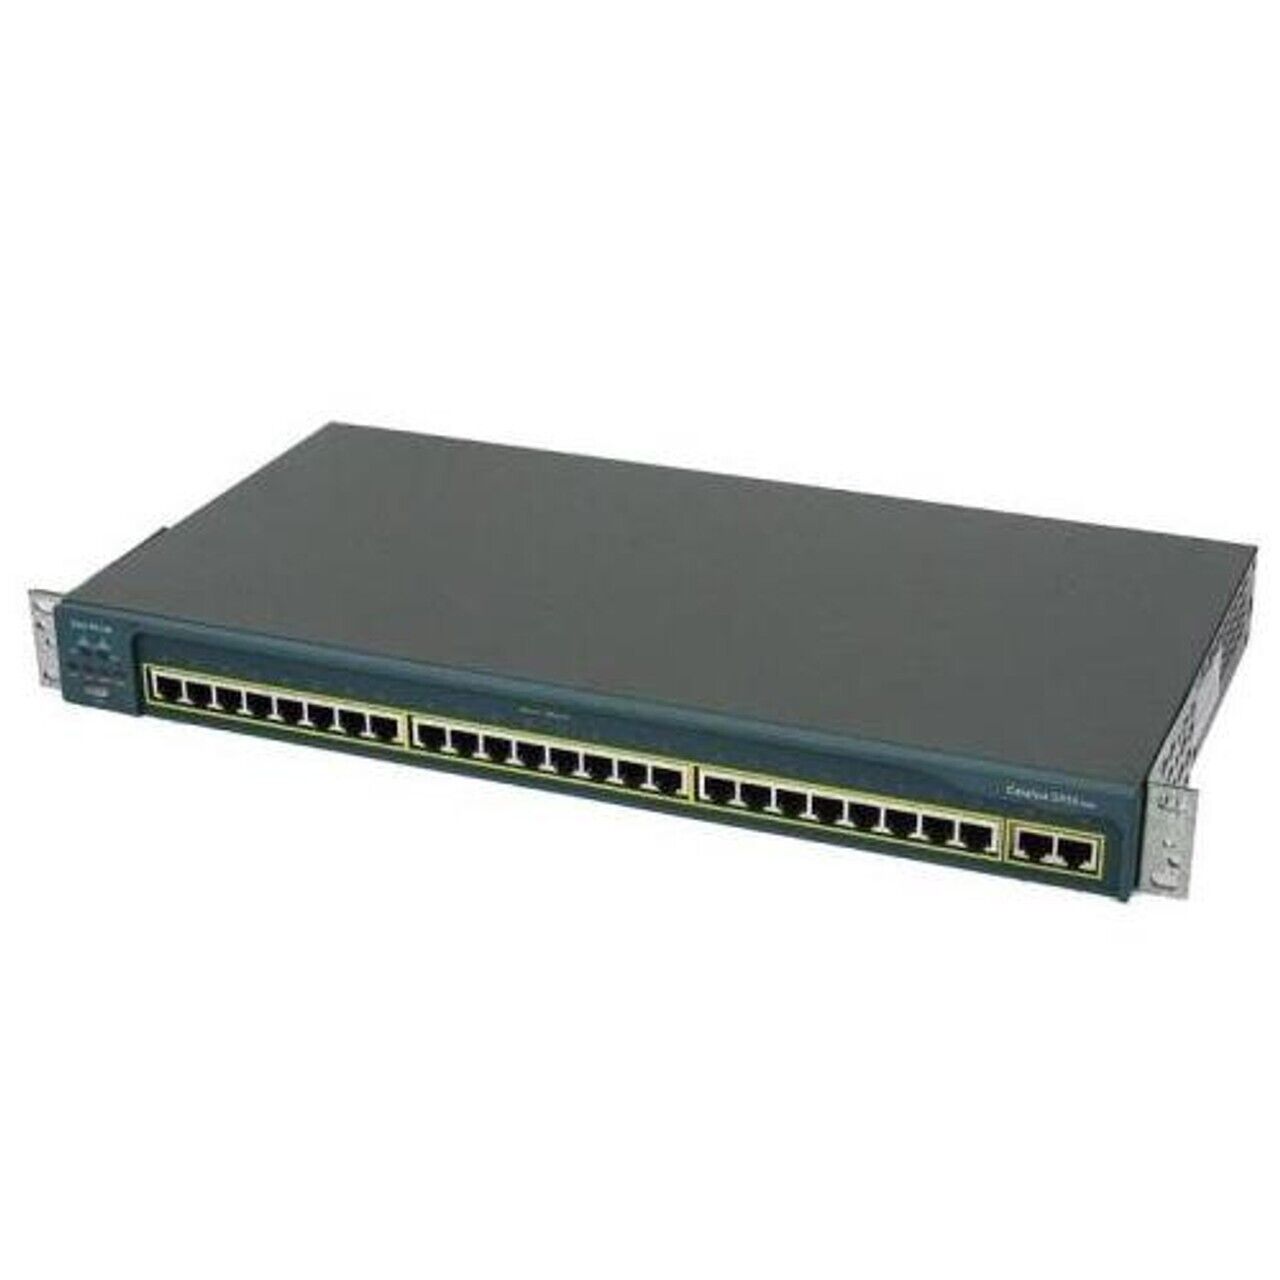 Cisco Catalyst 2950 Series 24-Port Fast Ethernet Switch WS-C2950-24